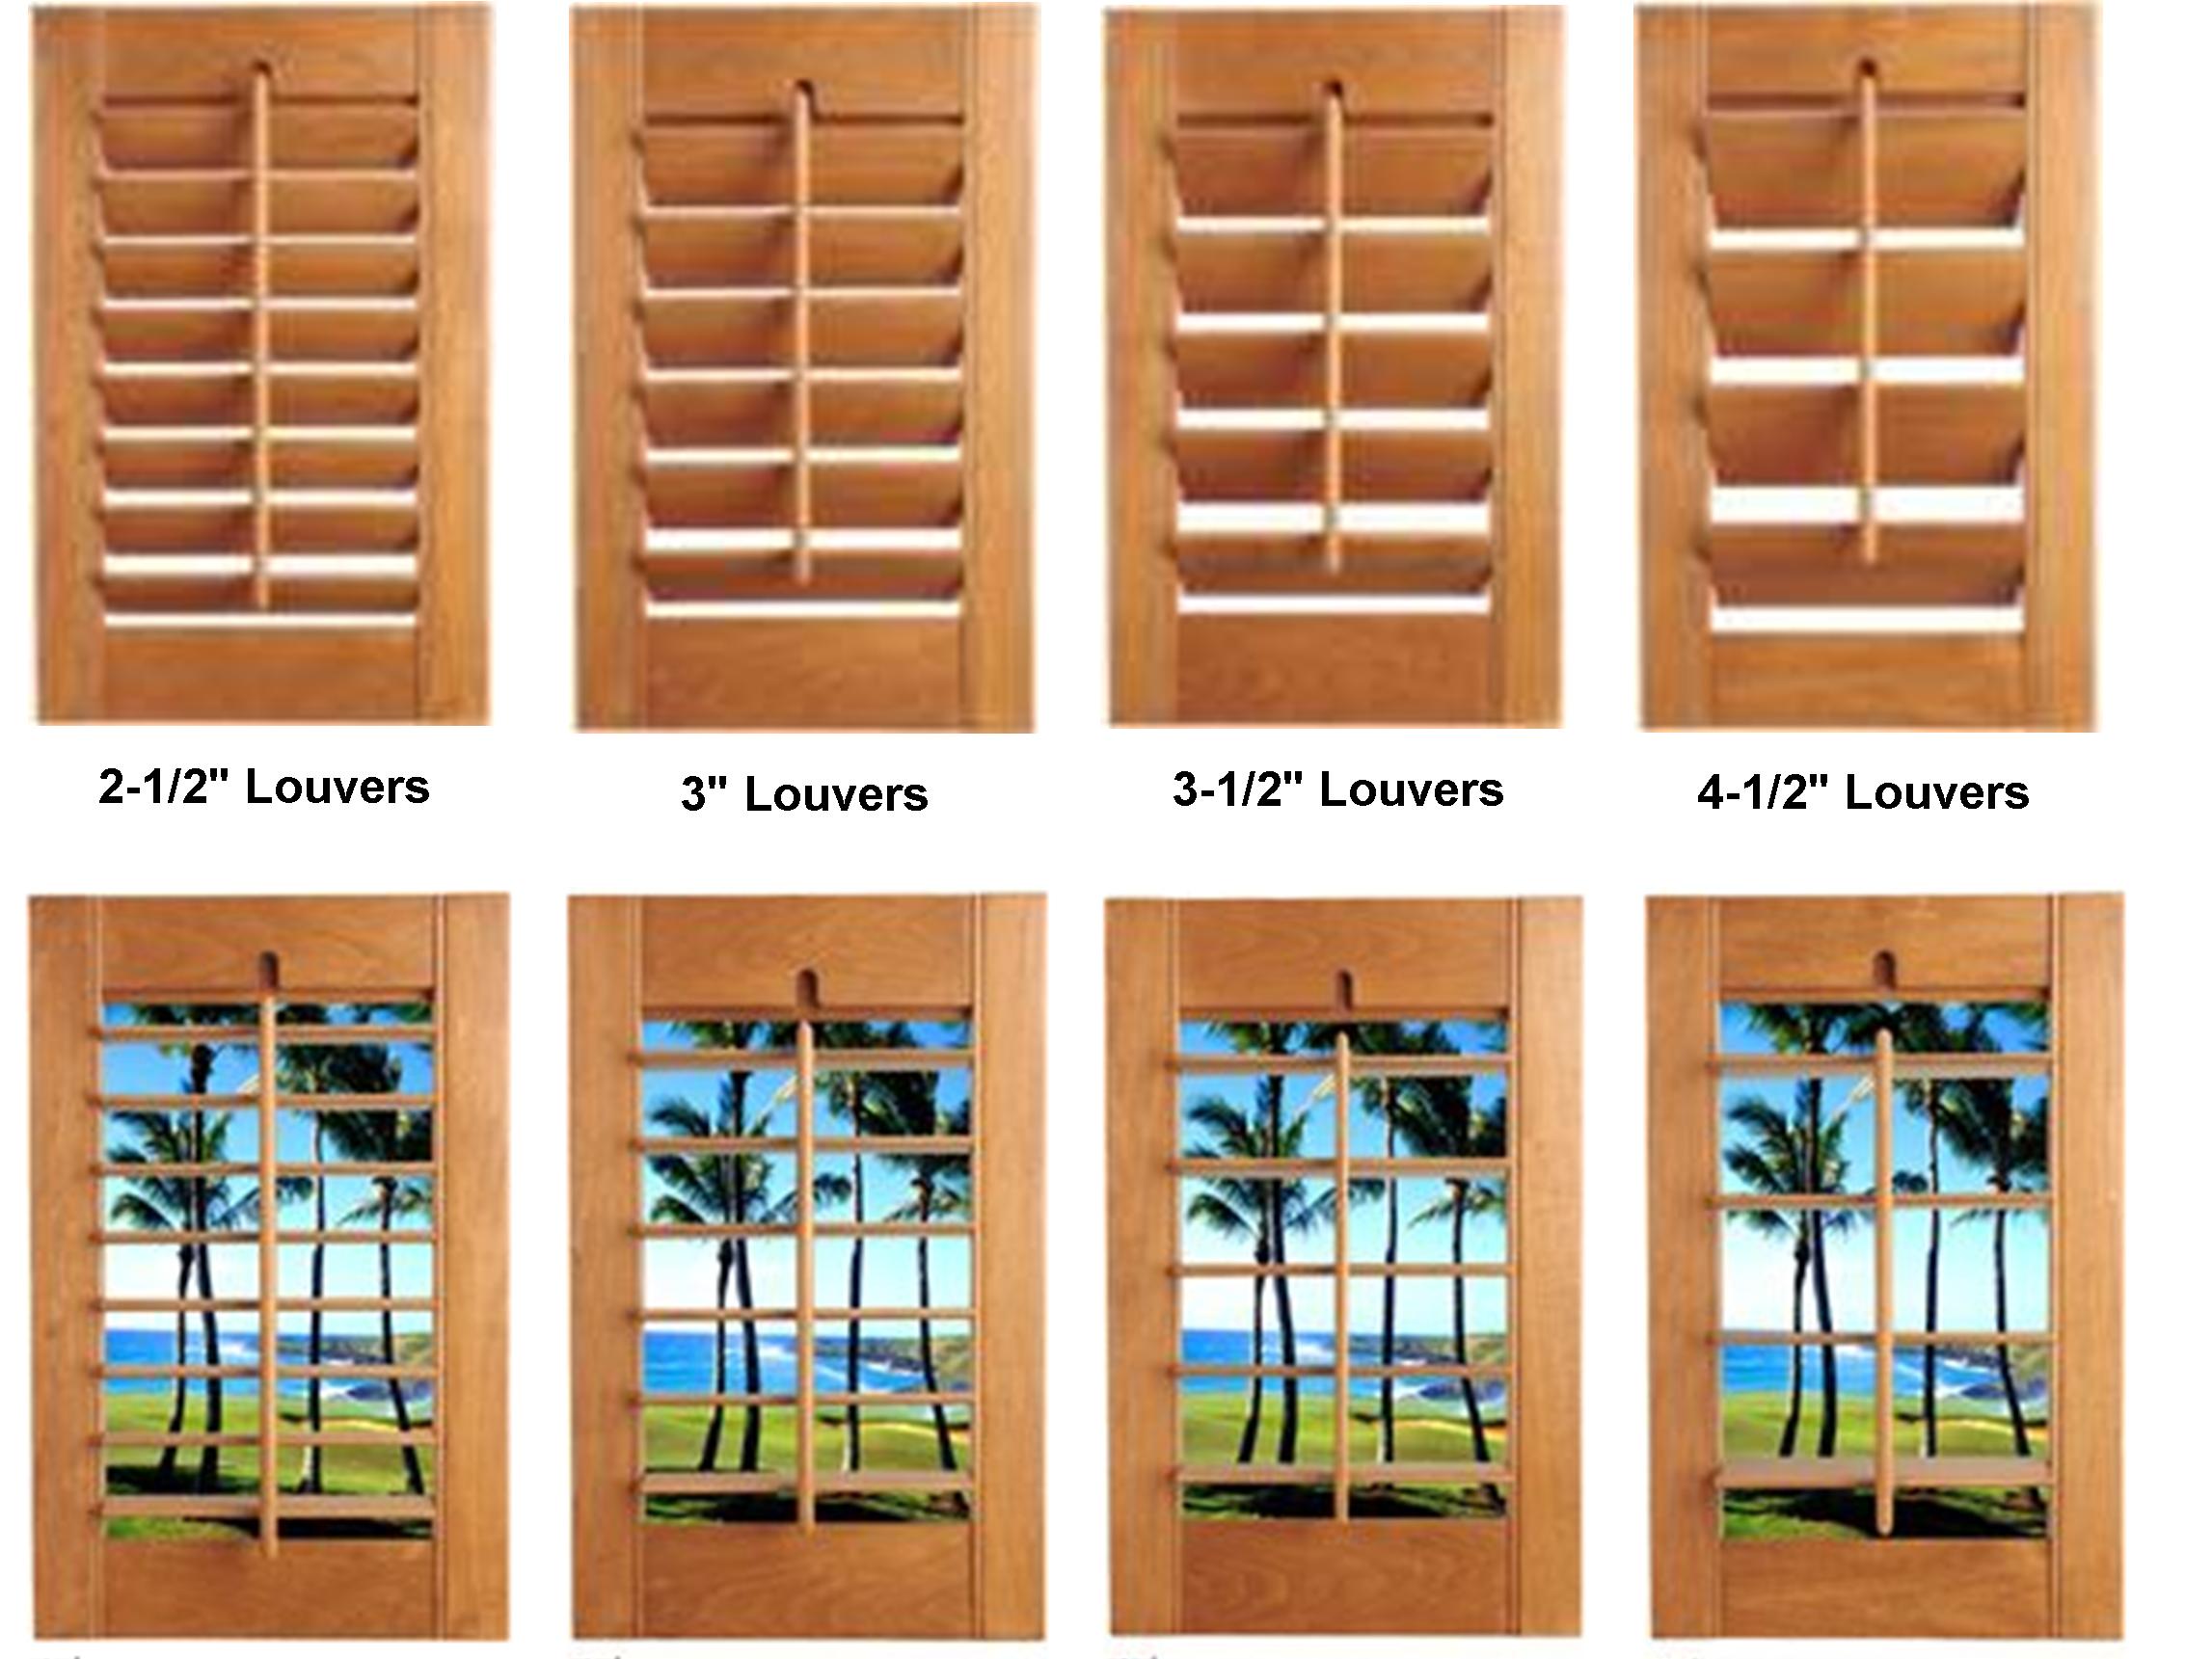 http://www.gatorcustomshutters.com/images/Shutters%20different%20Louver%20sizes.jpg